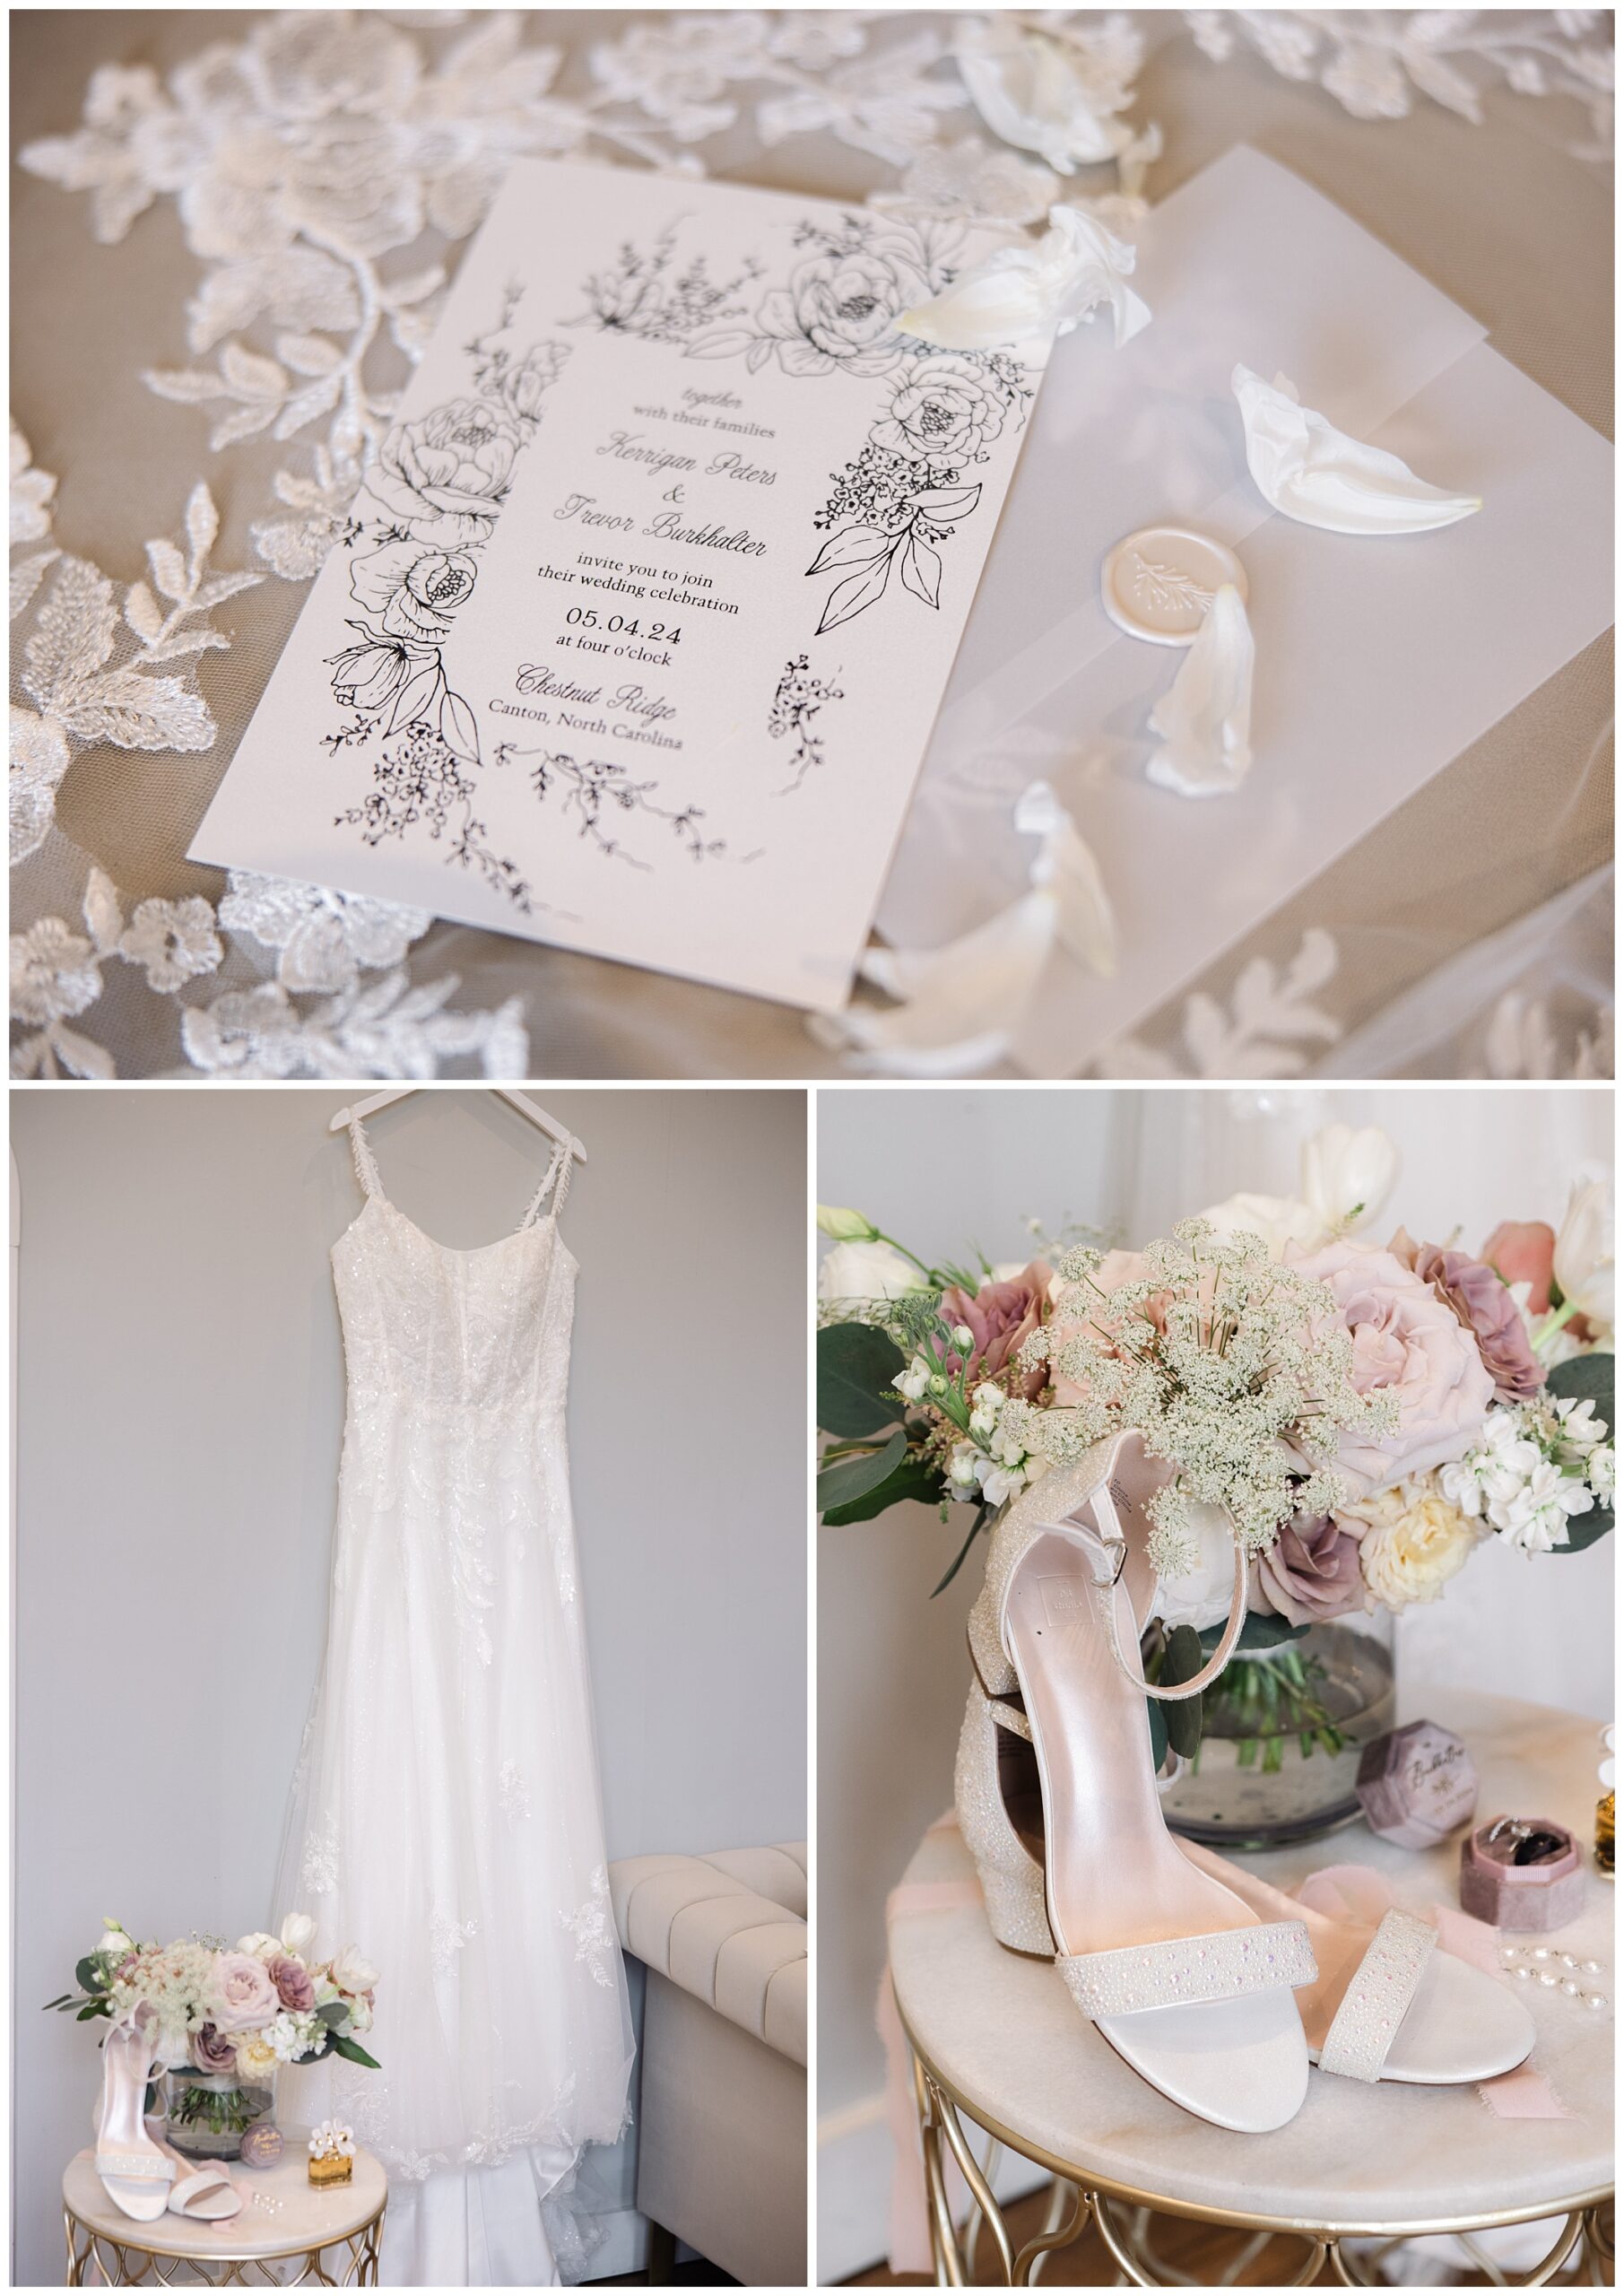 Elegant mountain wedding details including a white lace bridal gown, invitation card, white heels, floral arrangements, and accessories laid out decoratively at Chestnut Ridge.